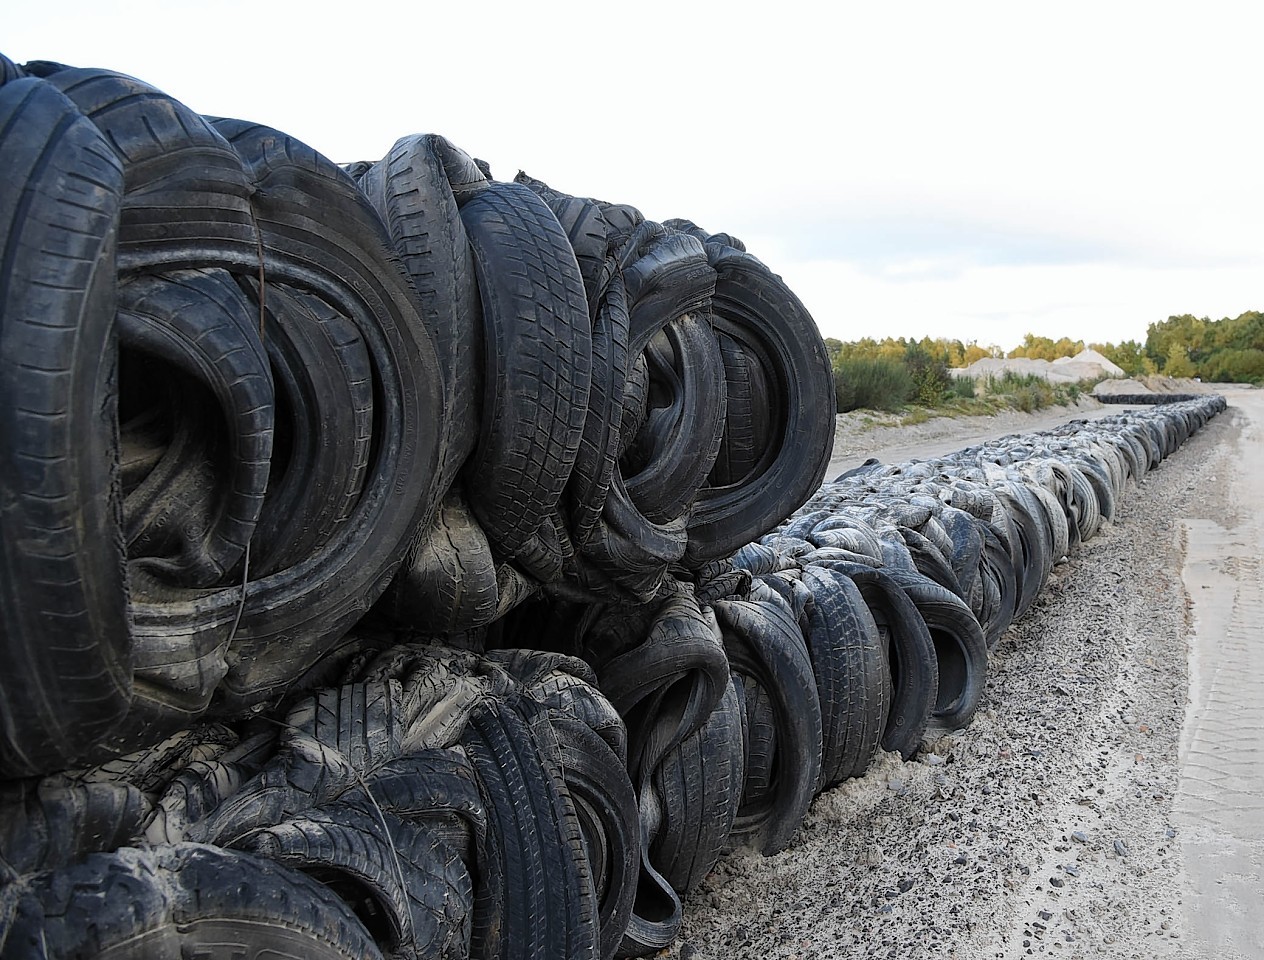 SSE's wall of tyres